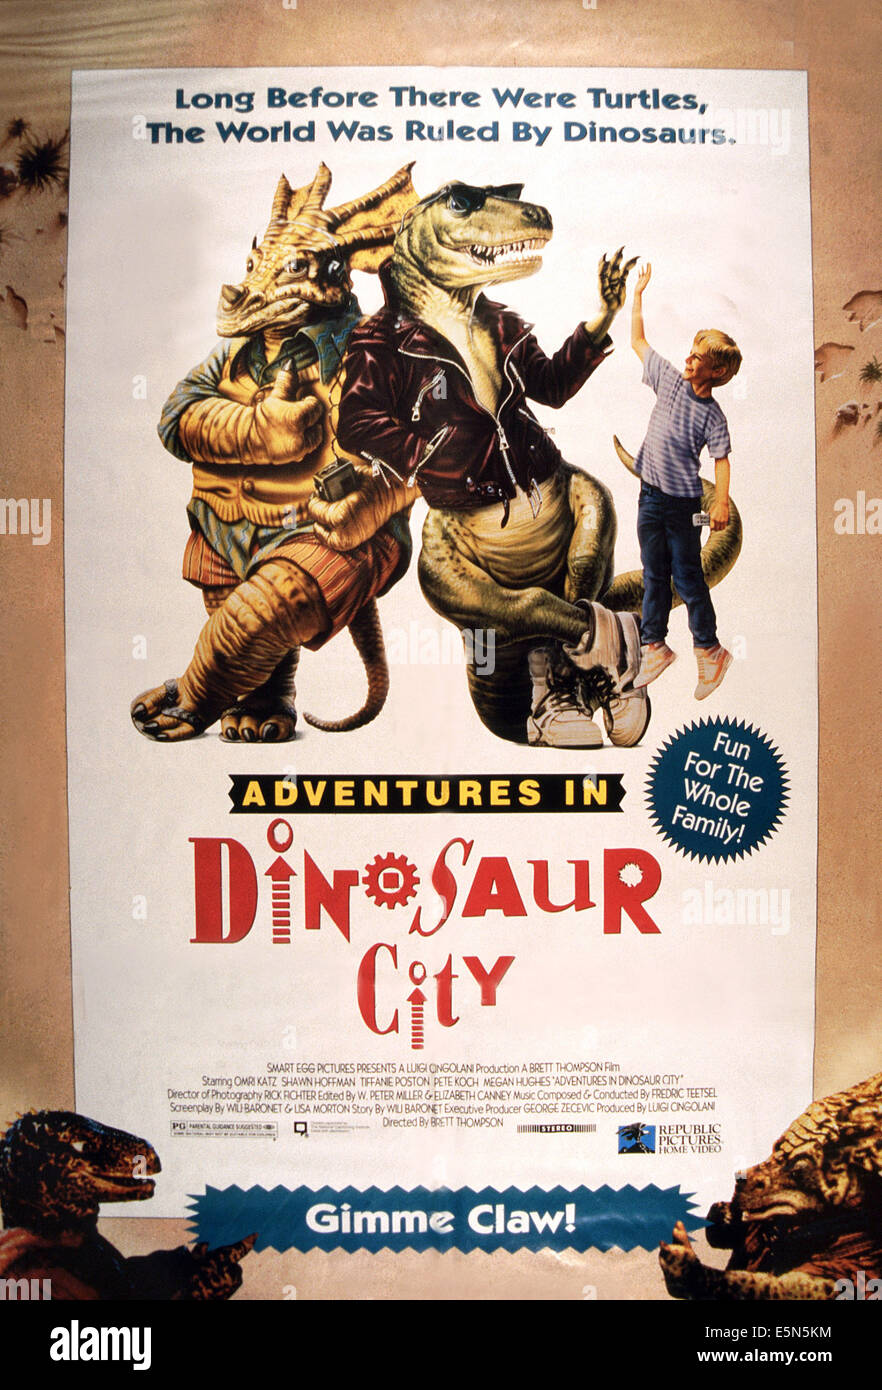 ADVENTURES IN DINOSAUR CITY, 1992 Banque D'Images